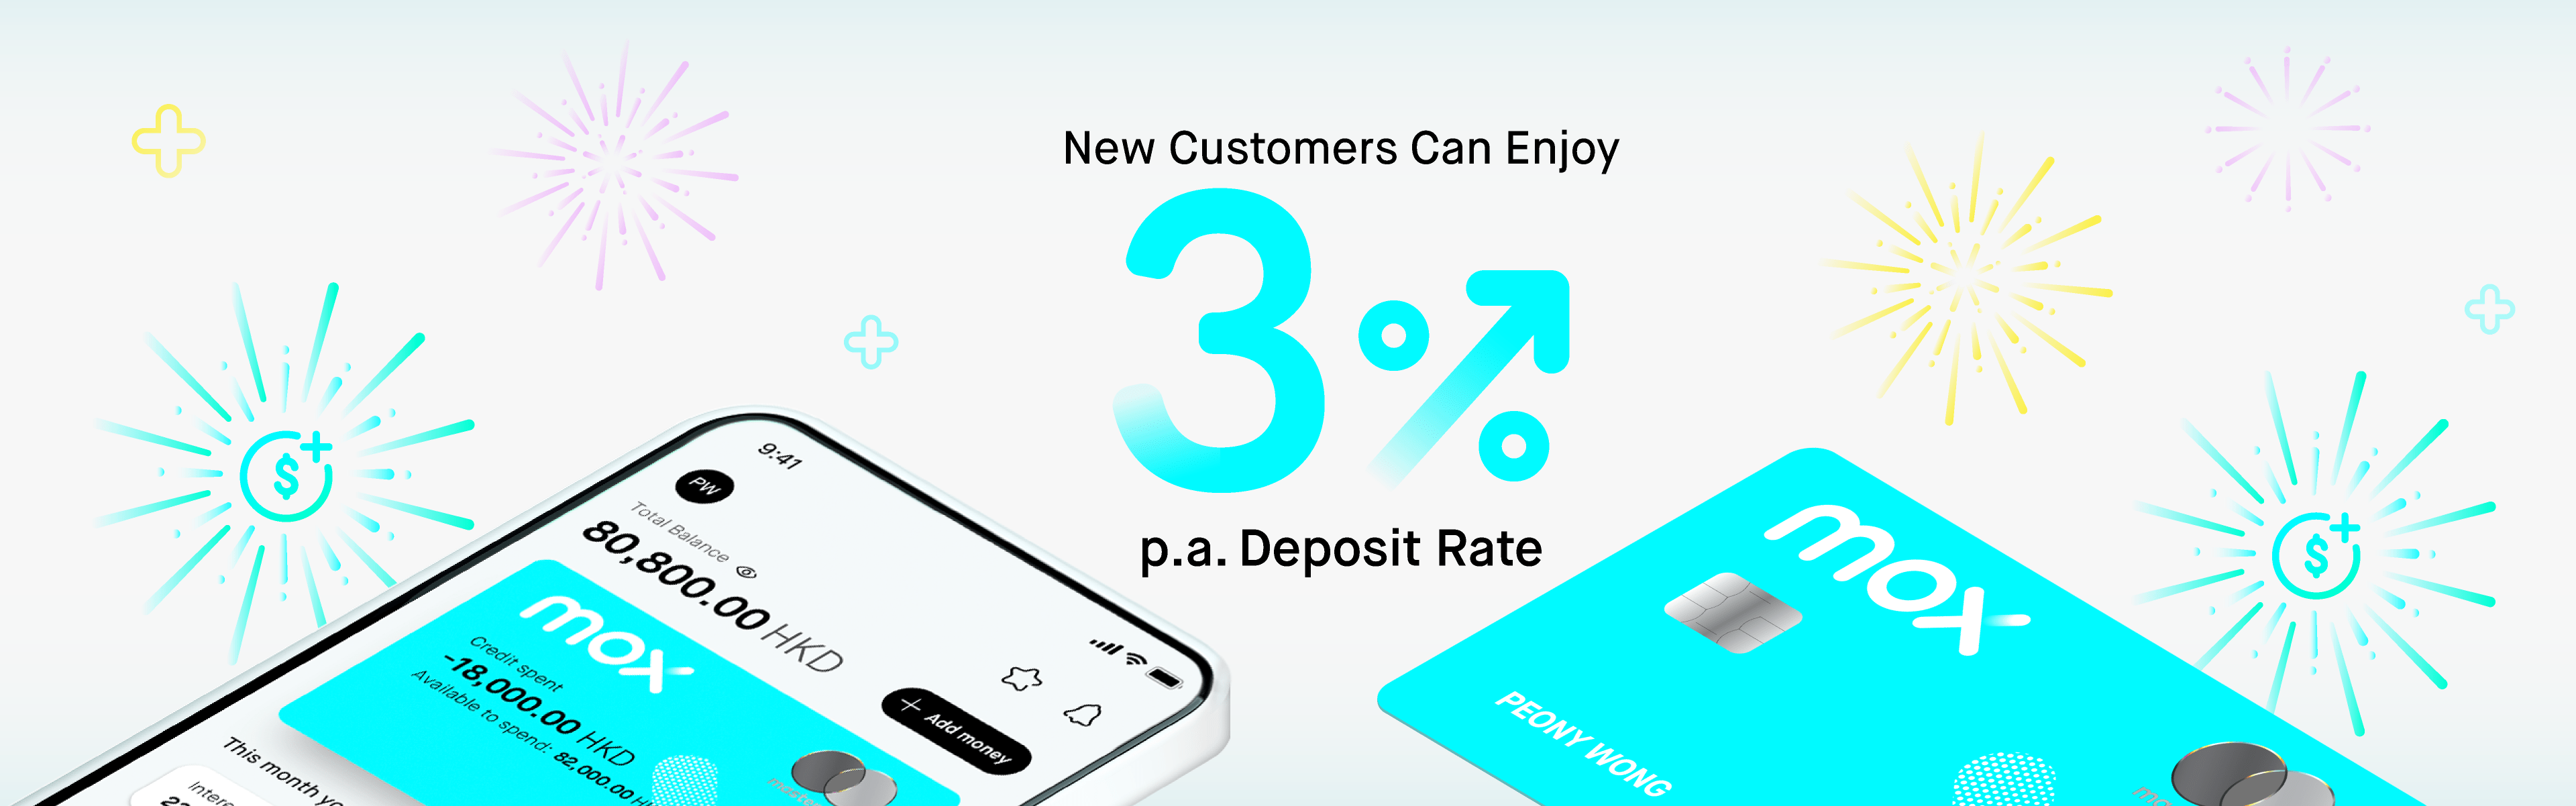 Mox Celebrates Second Anniversary with Exciting Offers New Customers Can Enjoy 3.0% p.a. Deposit Rate 